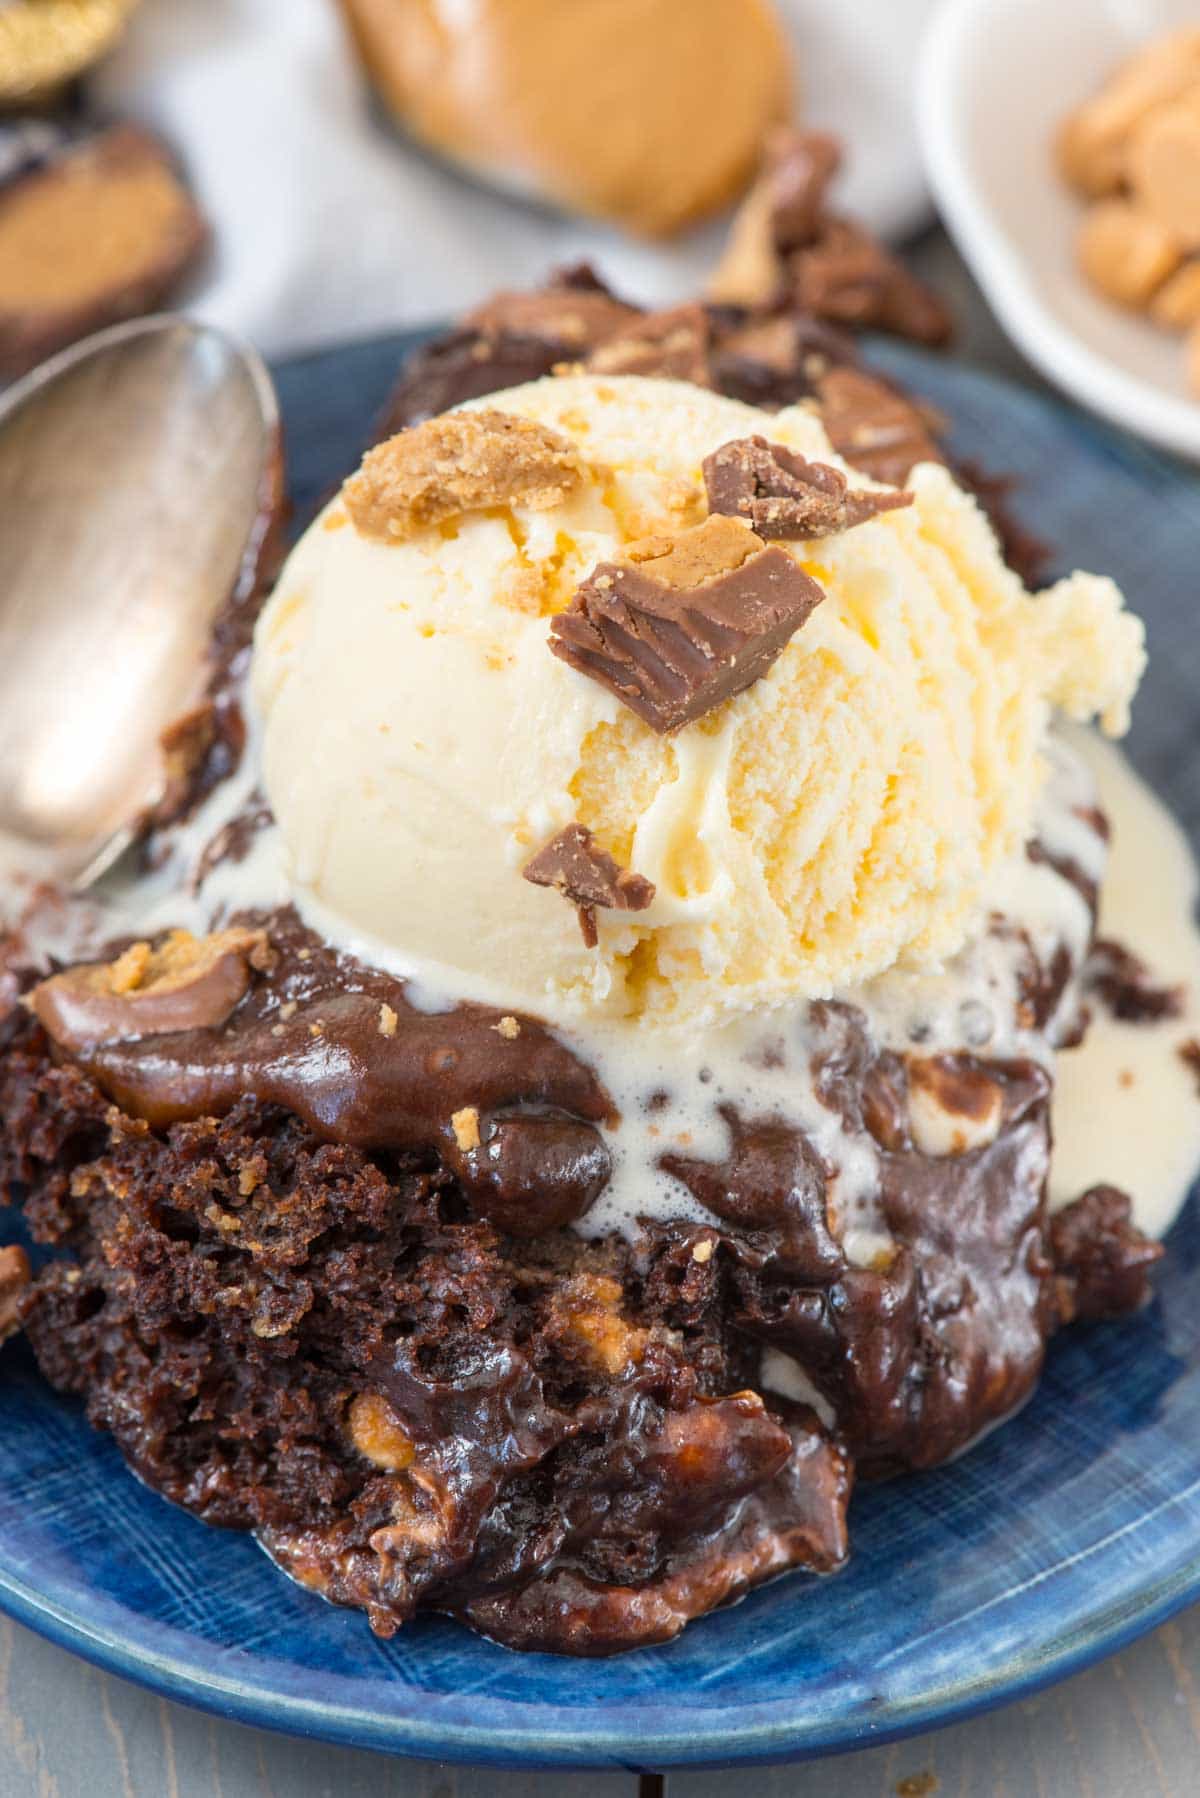 M&M'S® Peanut Butter Brownies Recipe & More Desserts for the Big Game